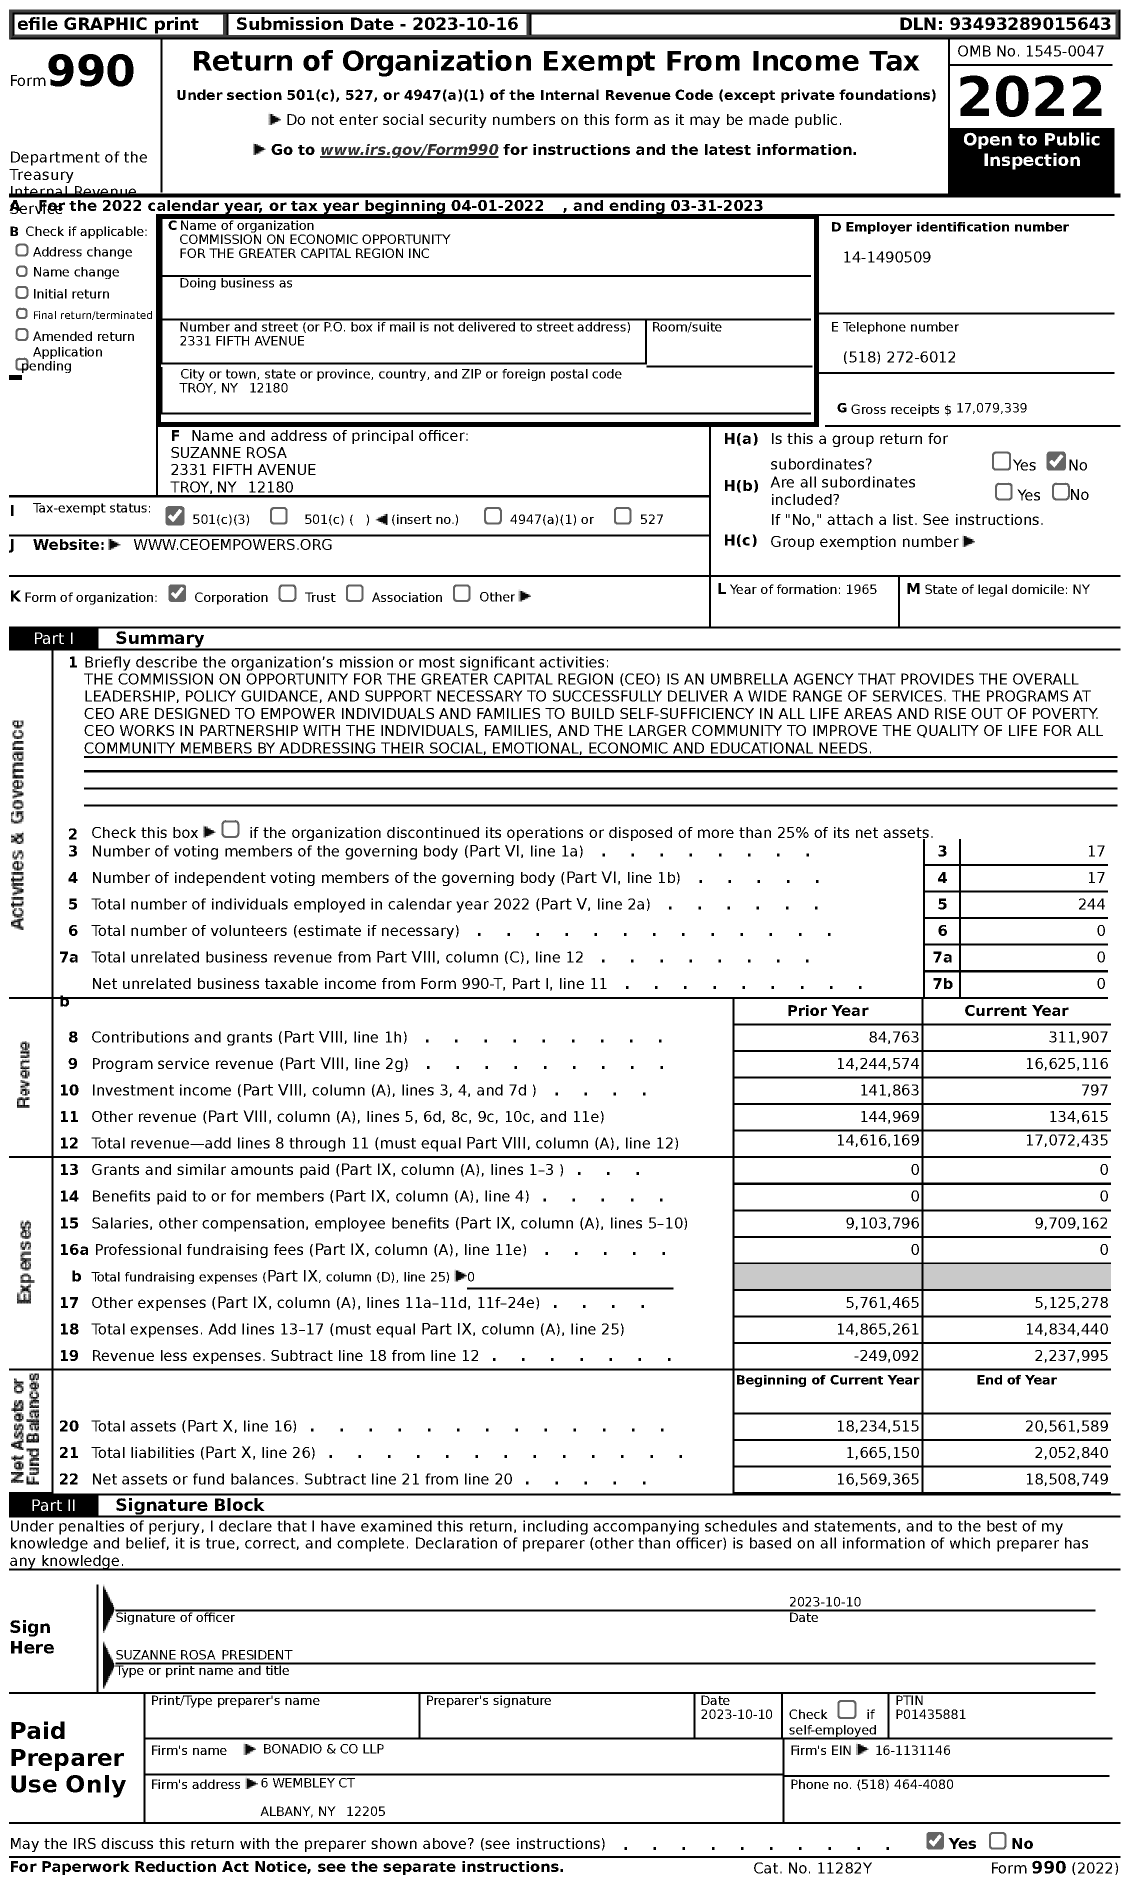 Image of first page of 2022 Form 990 for Commission on Economic Opportunity for the Greater Capital Region (CEO)